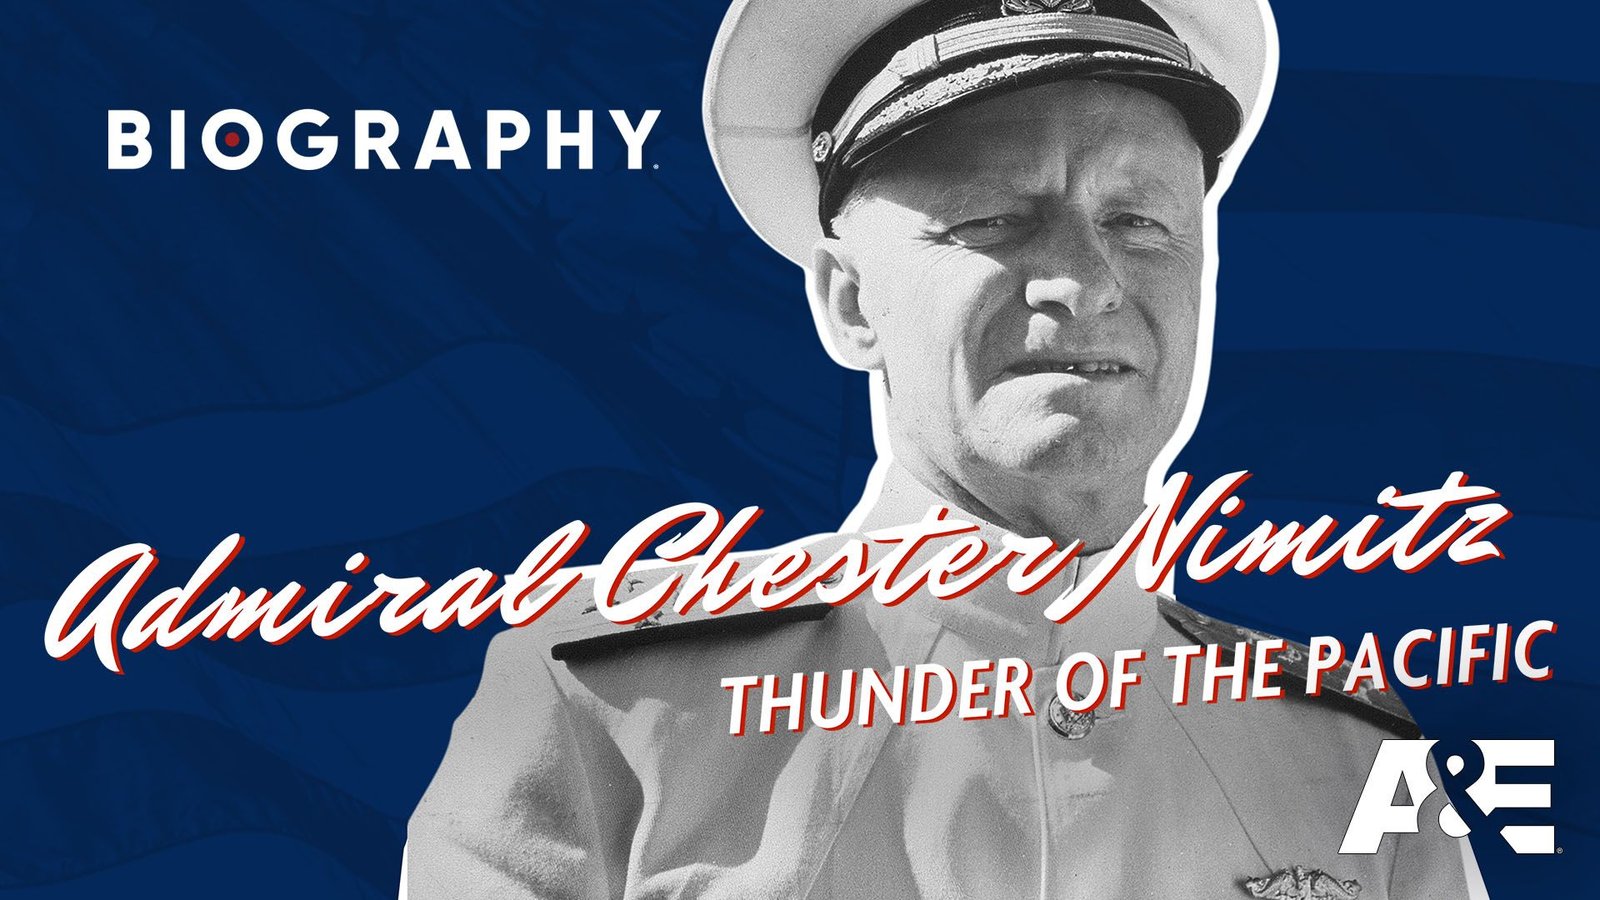 Admiral Chester Nimitz: Thunder Of the Pacific